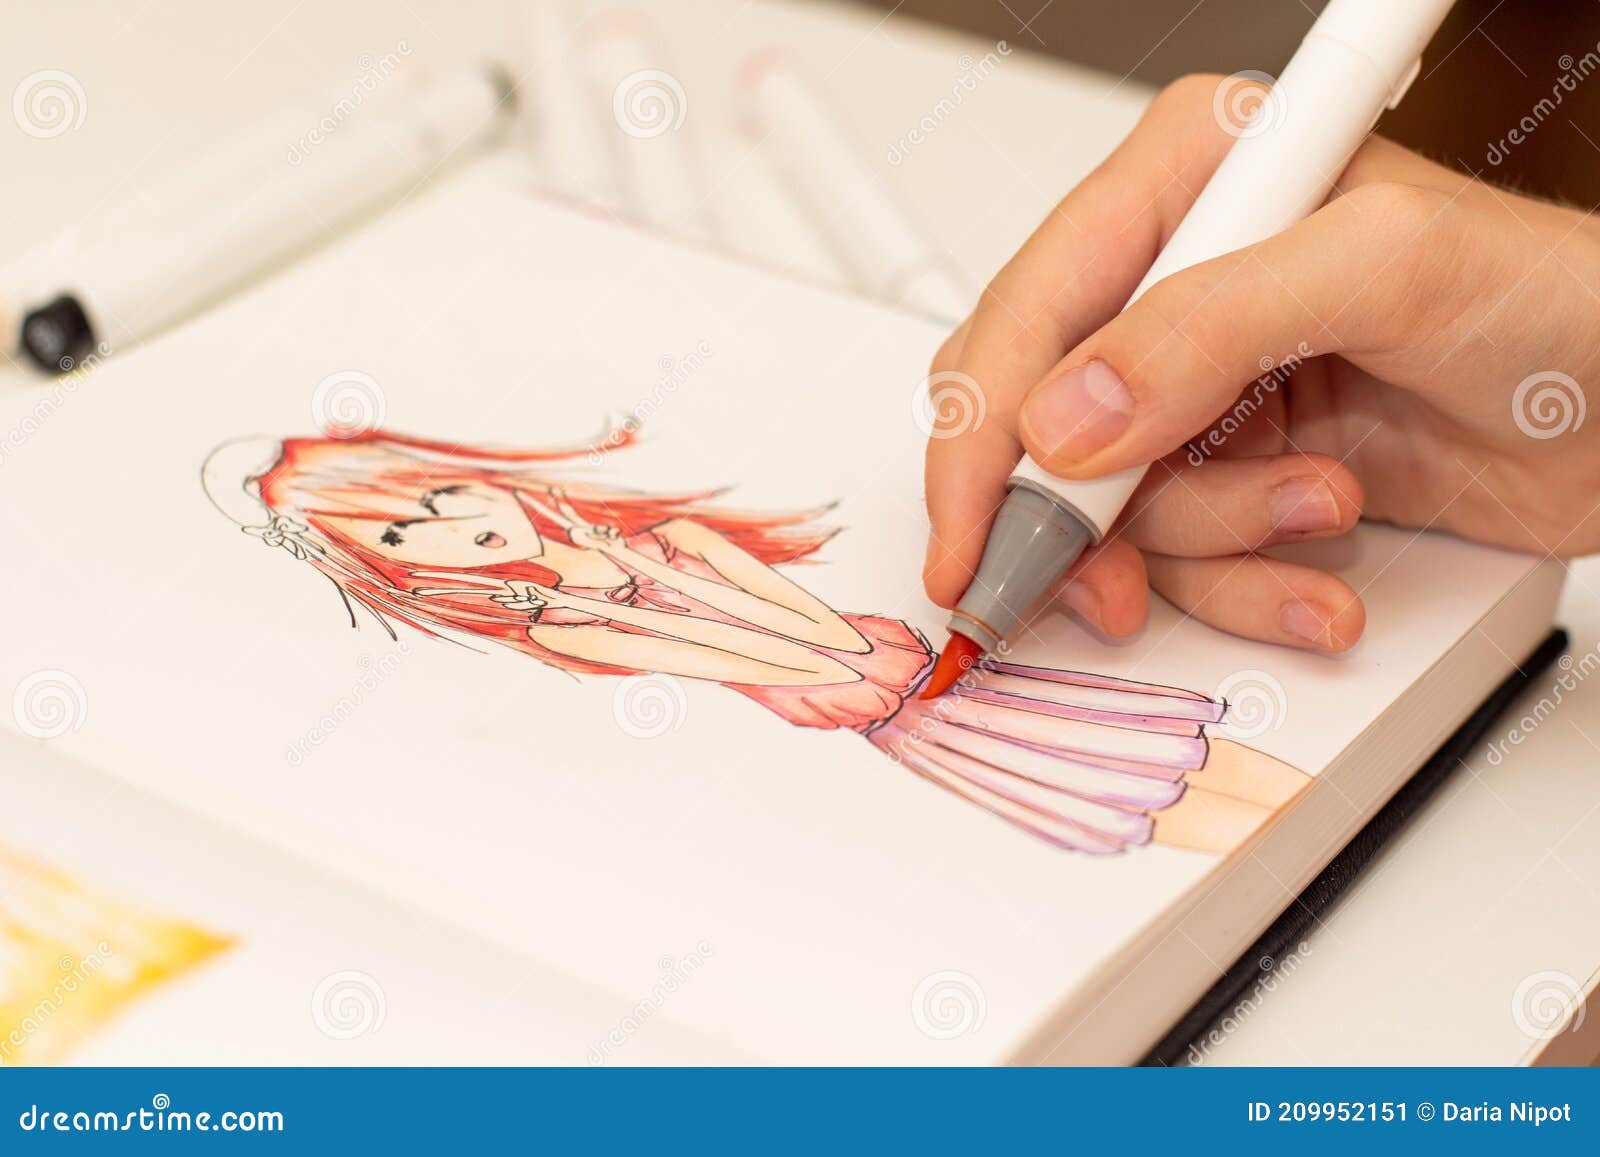 How to Draw Anime Hands and Feet  Envato Tuts